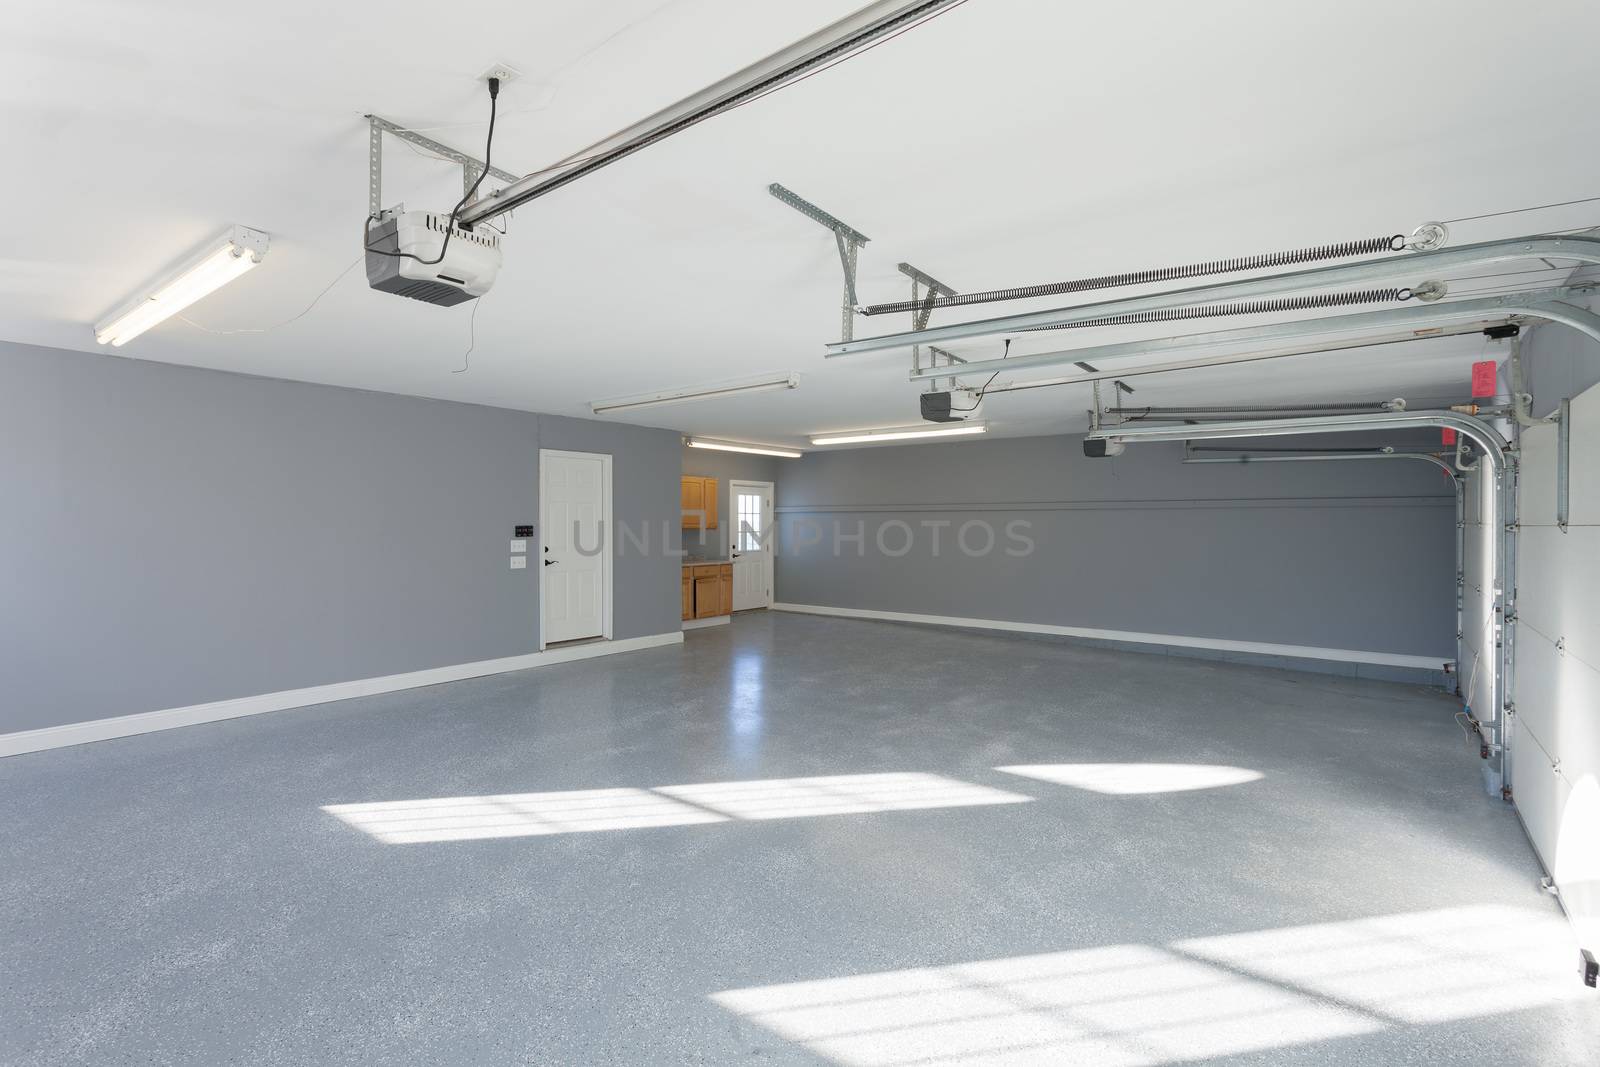 Beautiful brand new three car garage interior with finished floors and work space.